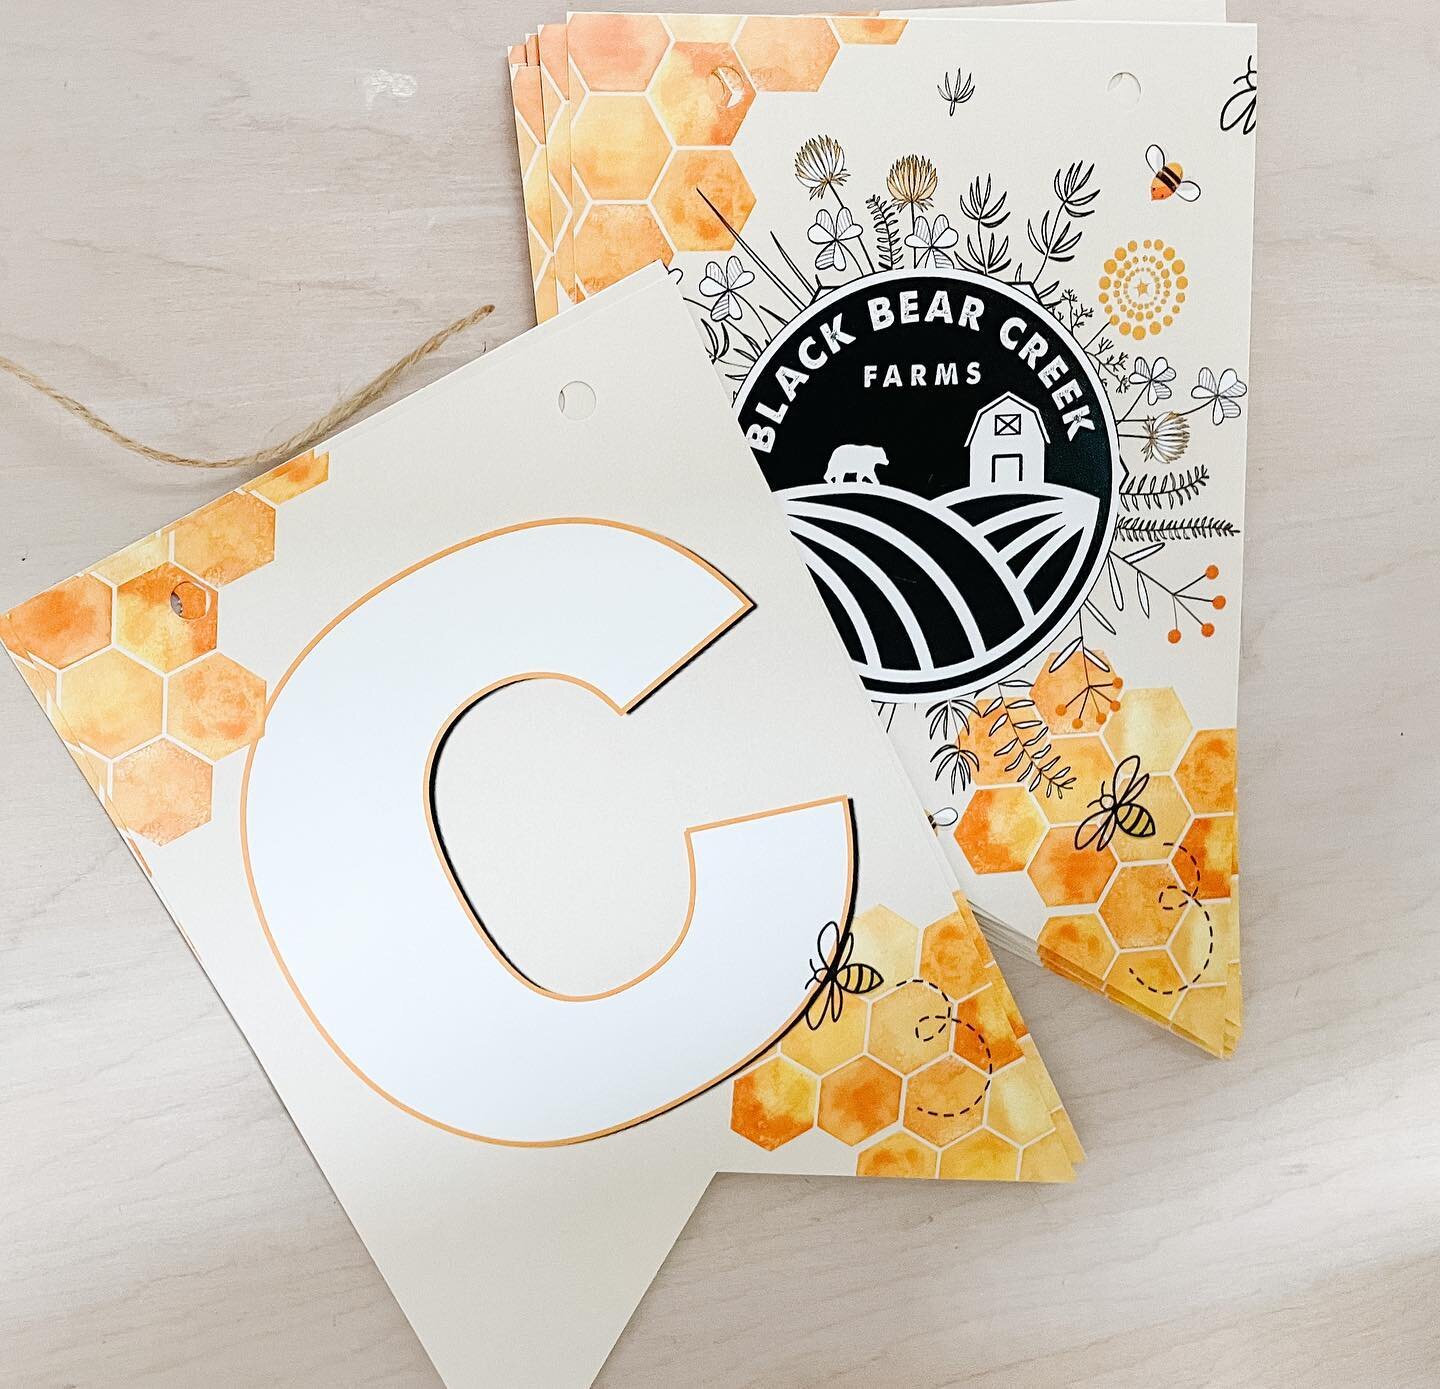 🍯NOTHING SWEETER THAN A SUNNY FRIDAY🍯
.
Happy Friday Party People!
.
Custom Spring Banner for @blackbearcreekfarms Market Booth at this weekends Spring Market at the Ovintiv events centre.
.
#custompartydecor #custombanner #papercrafts #paperpartys